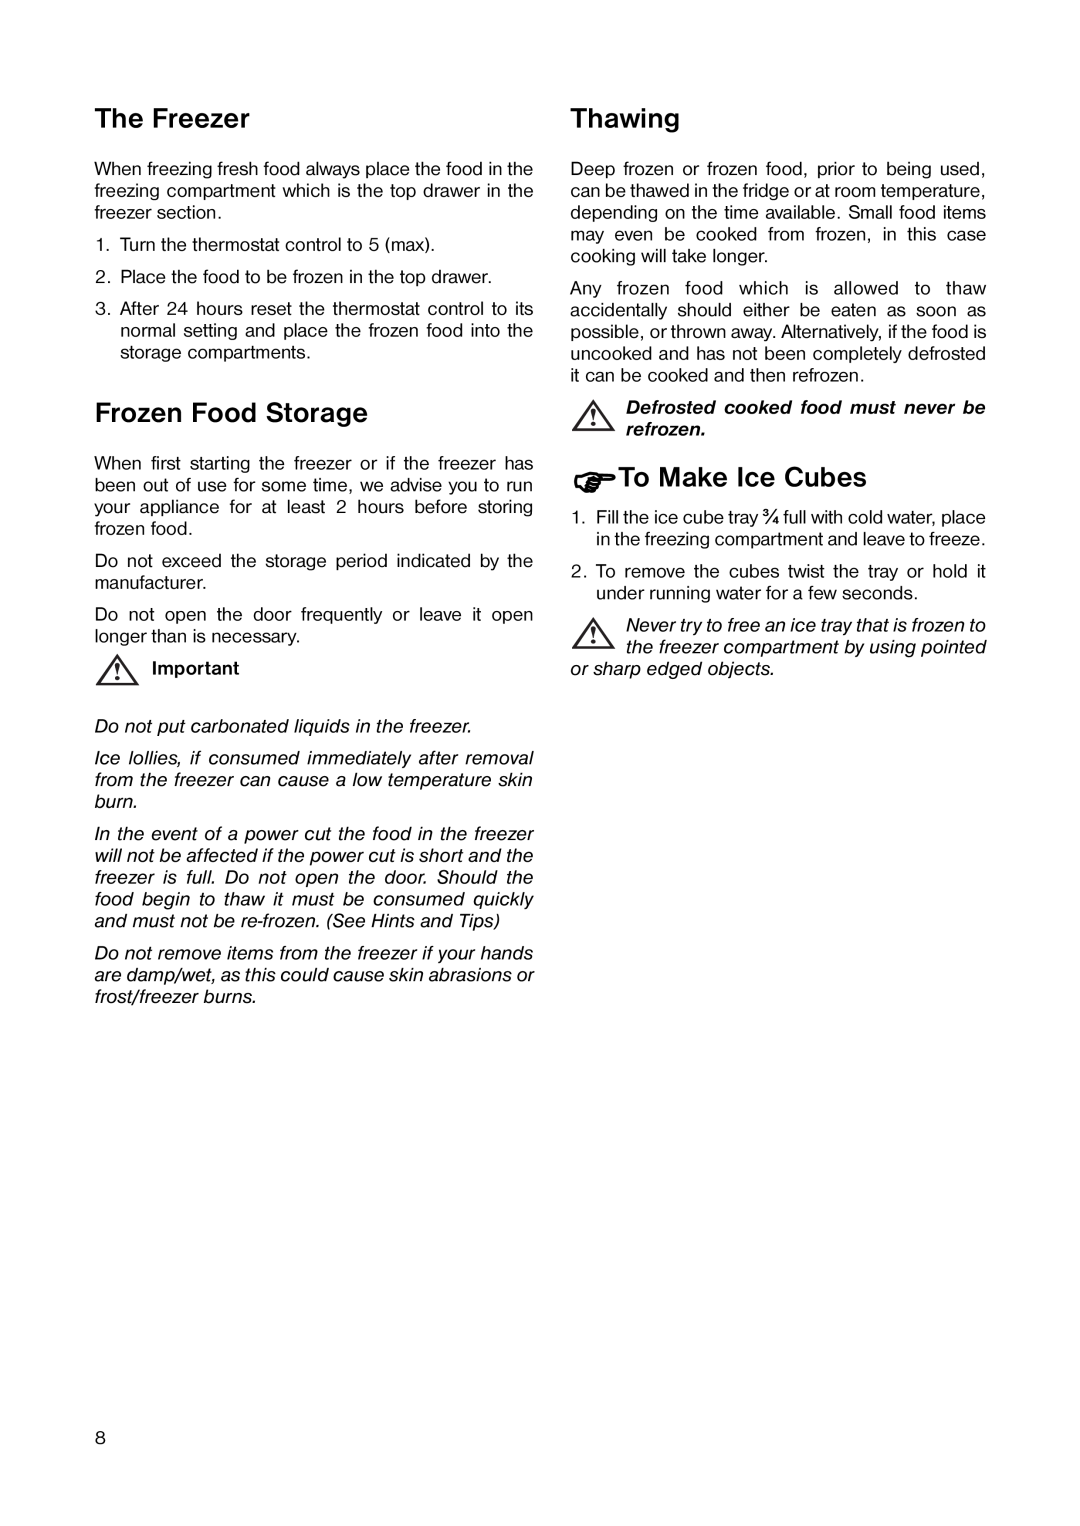 Tricity Bendix TB 117 FF installation instructions The Freezer, Frozen Food Storage, Thawing, ΦTo Make Ice Cubes 